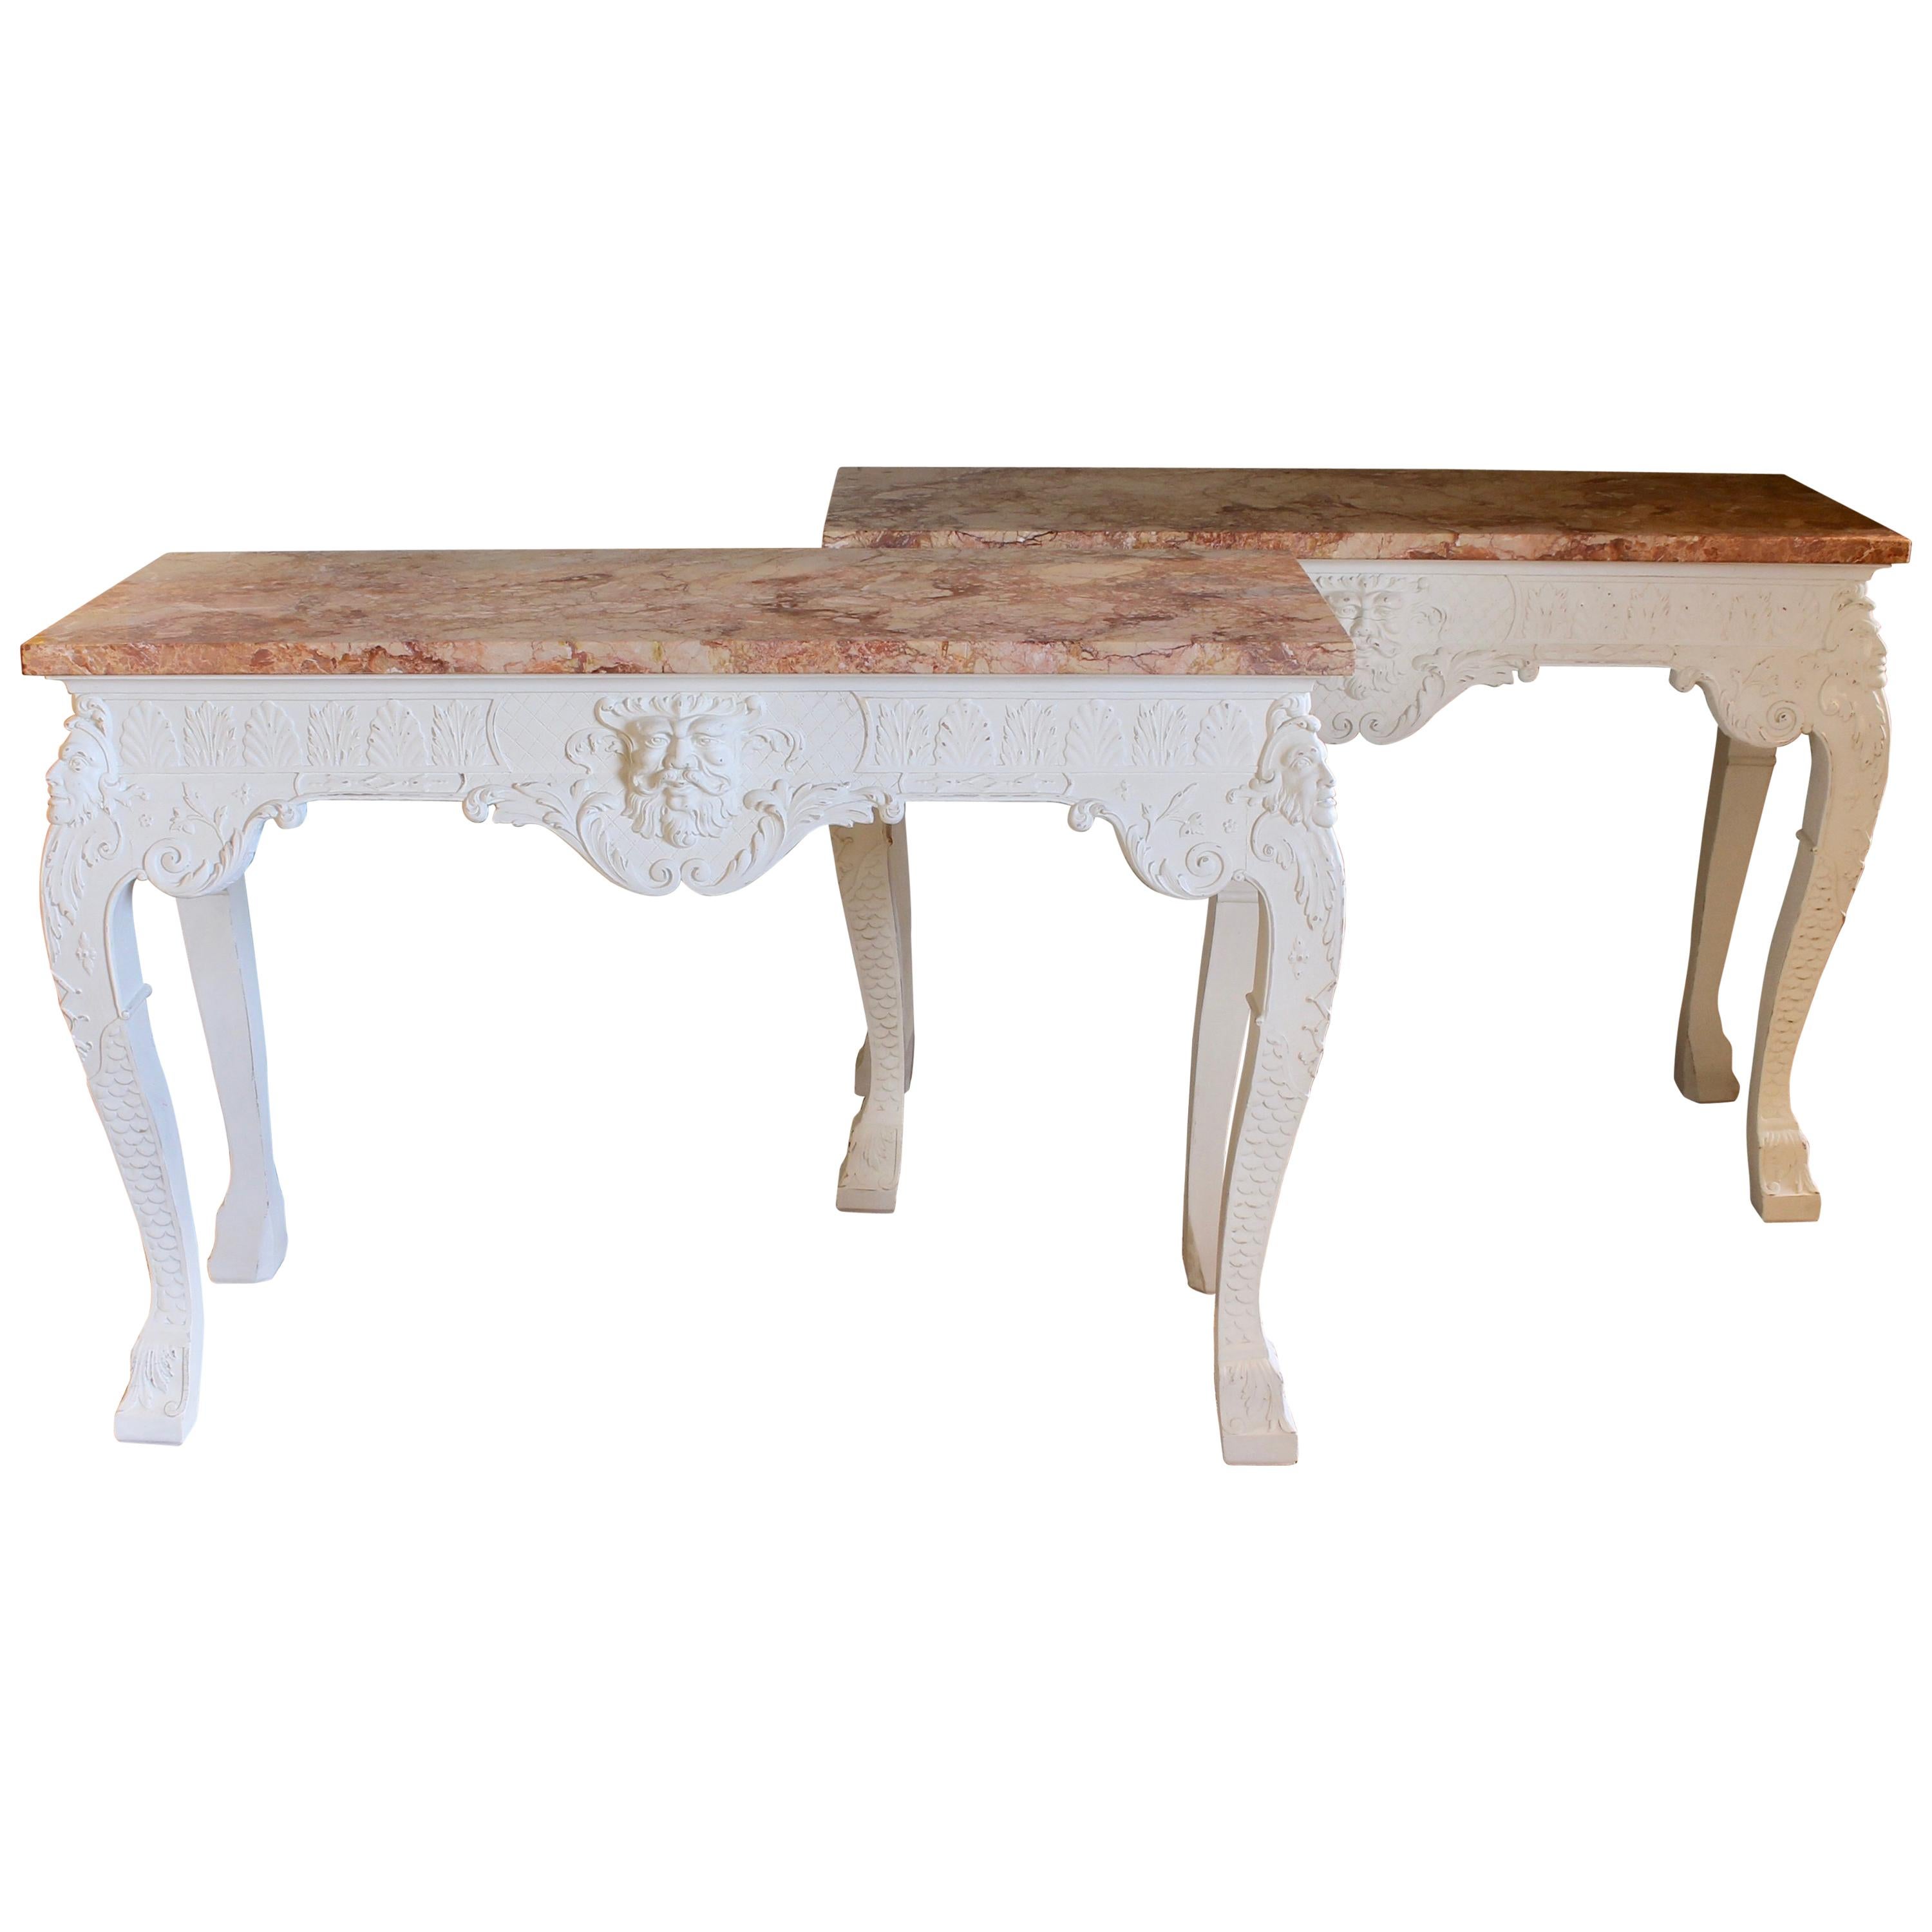 Pair of George III Style Marble-Top Console Tables